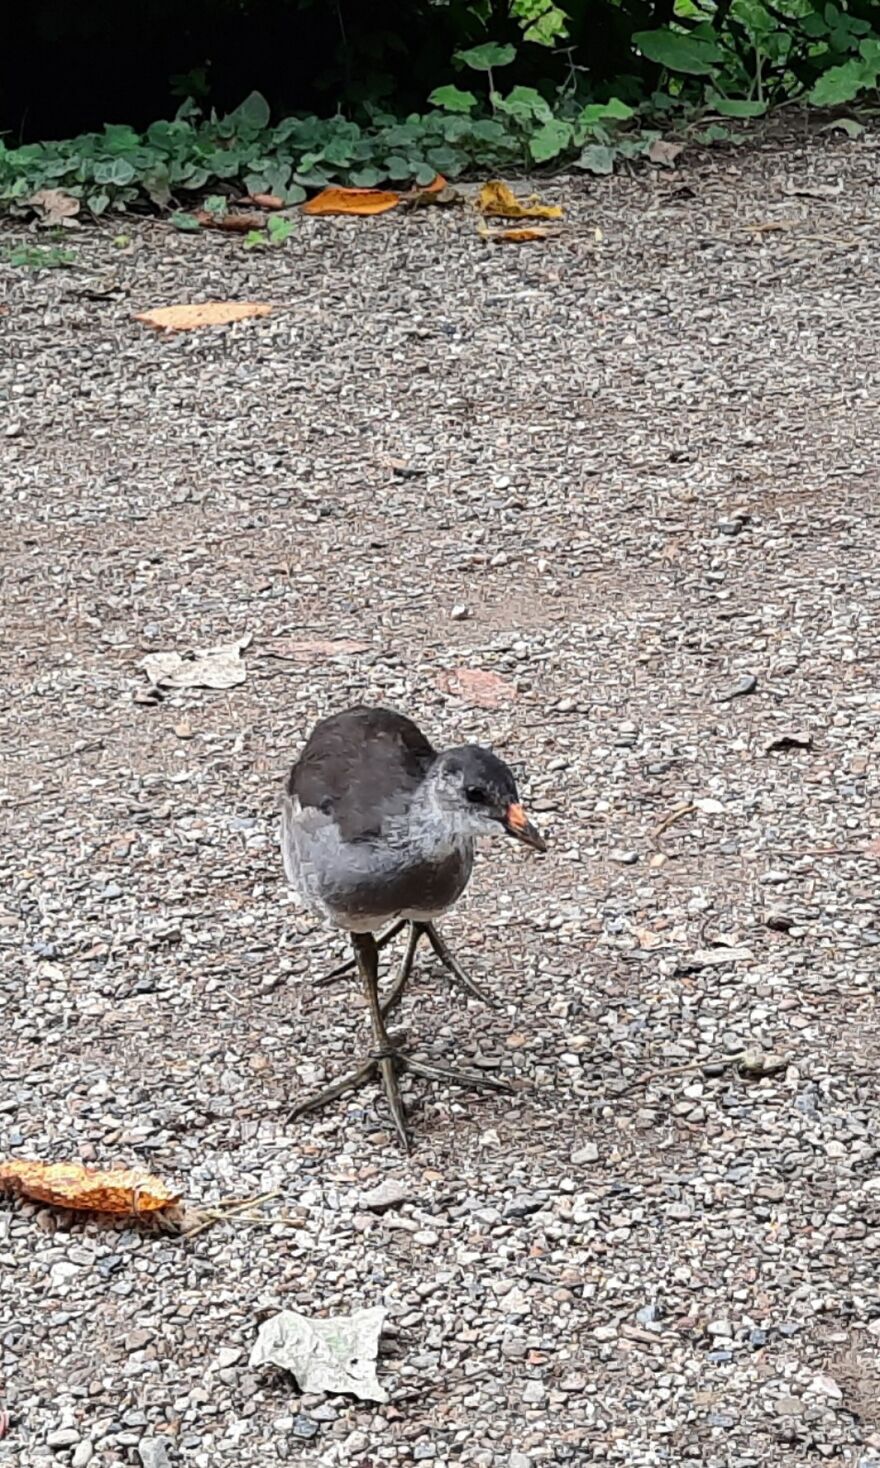 Idk What Kind Of Baby Duck This Is But It Has Insanely Big Feet